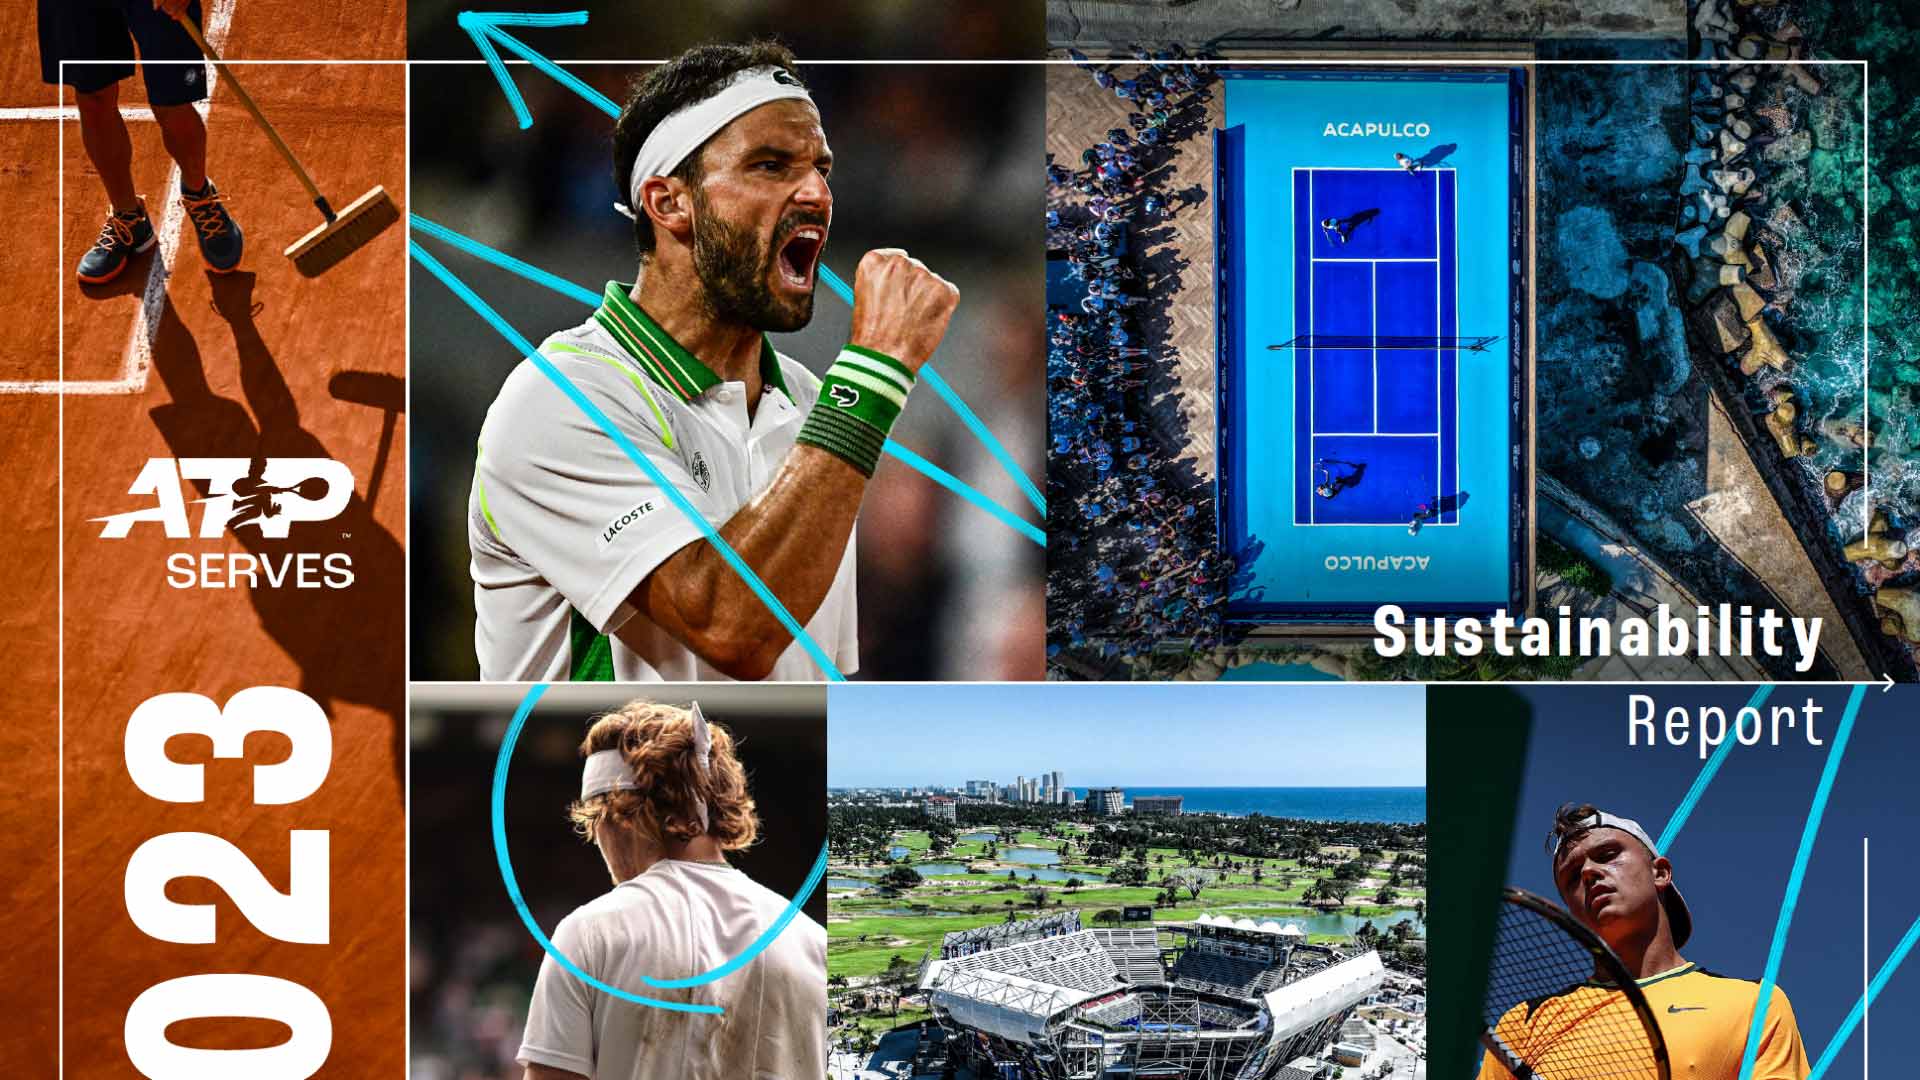 ATP publishes inaugural sustainability report